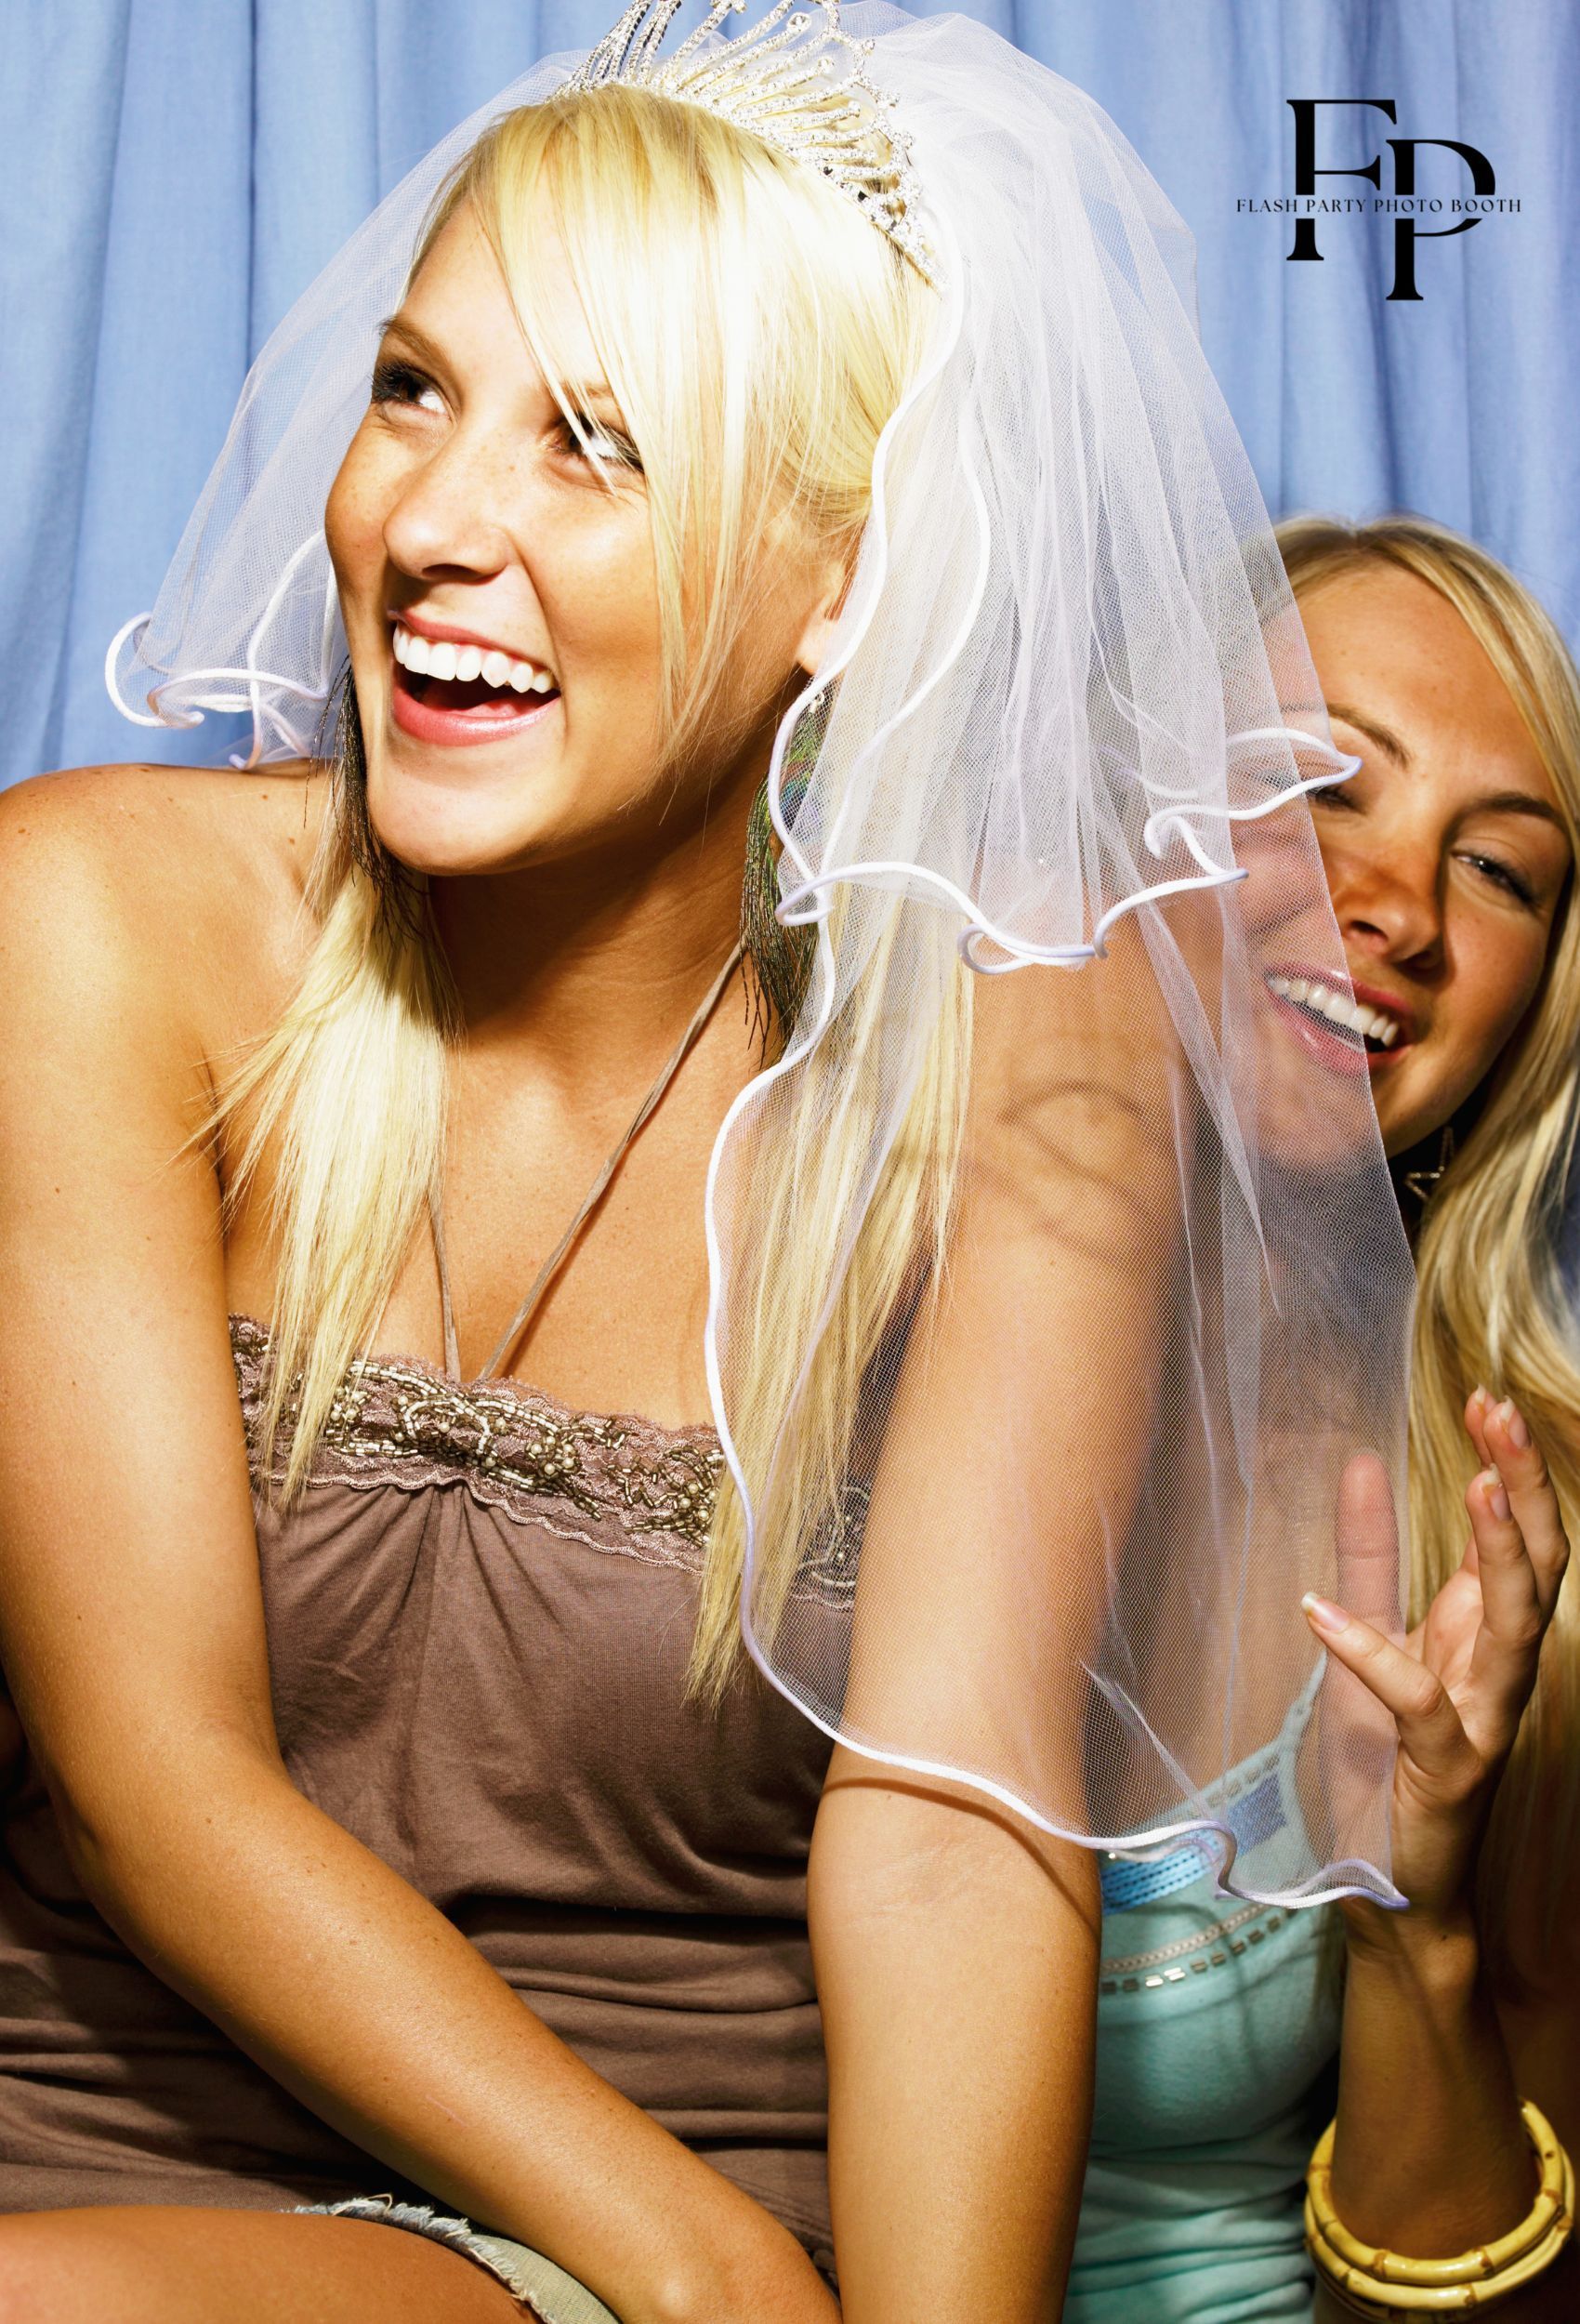 rent an Astro photo booth for your next event or party in South Austin, tX